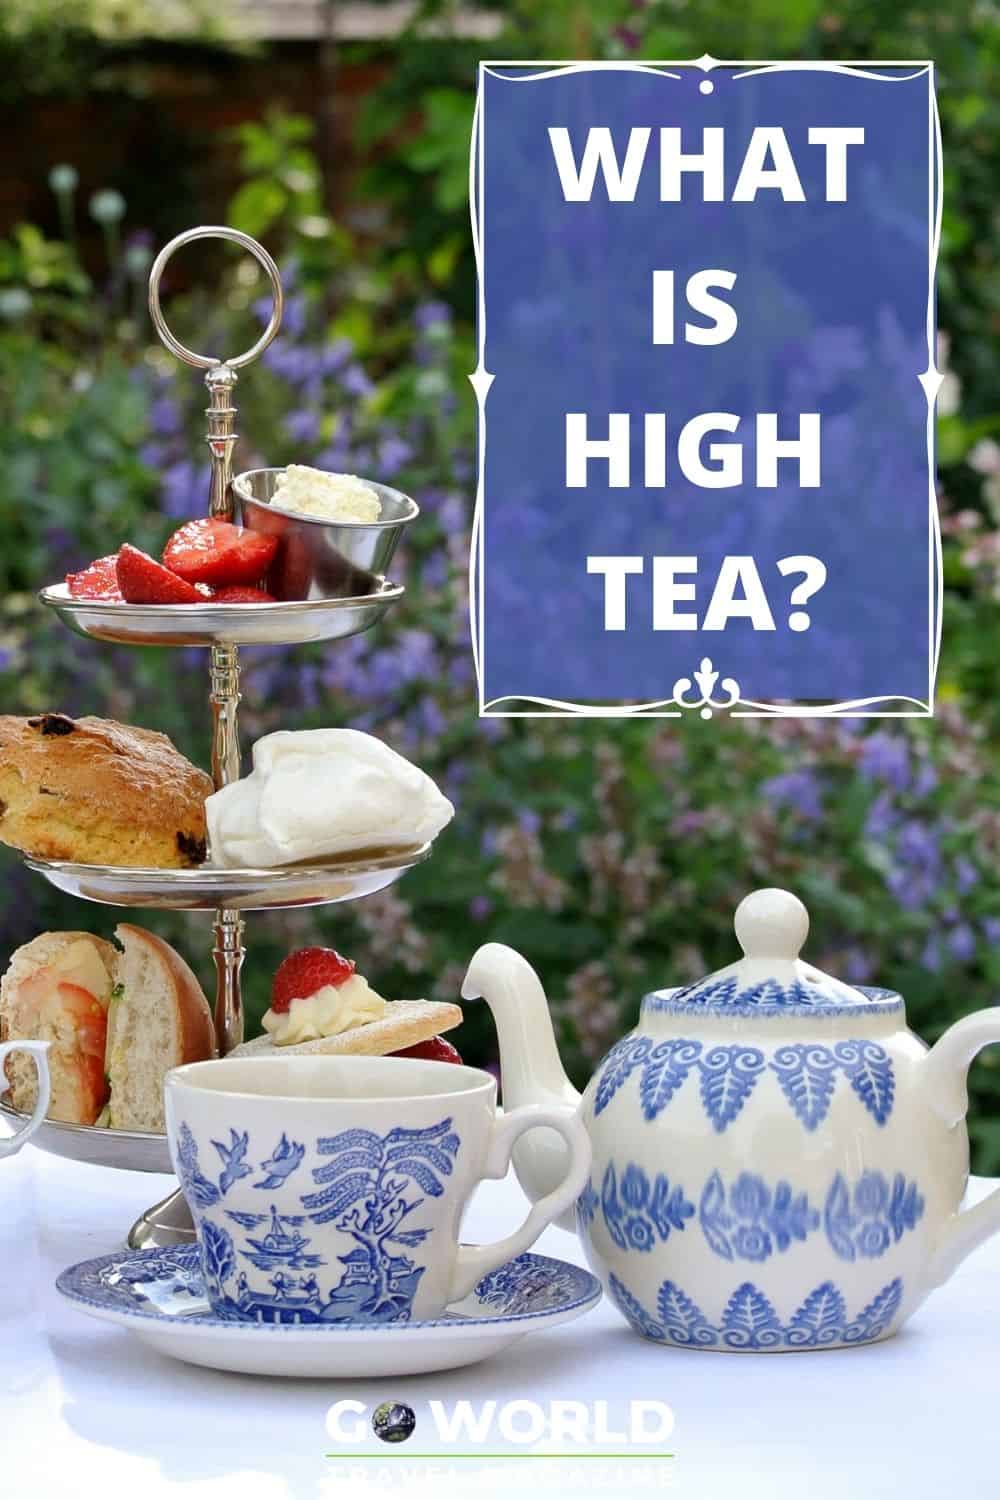 What is high tea exactly? A tea loving Brit explains the nuances of tea drinking and tea eating. Yes, tea can also be eaten. #englishteas #creamtea